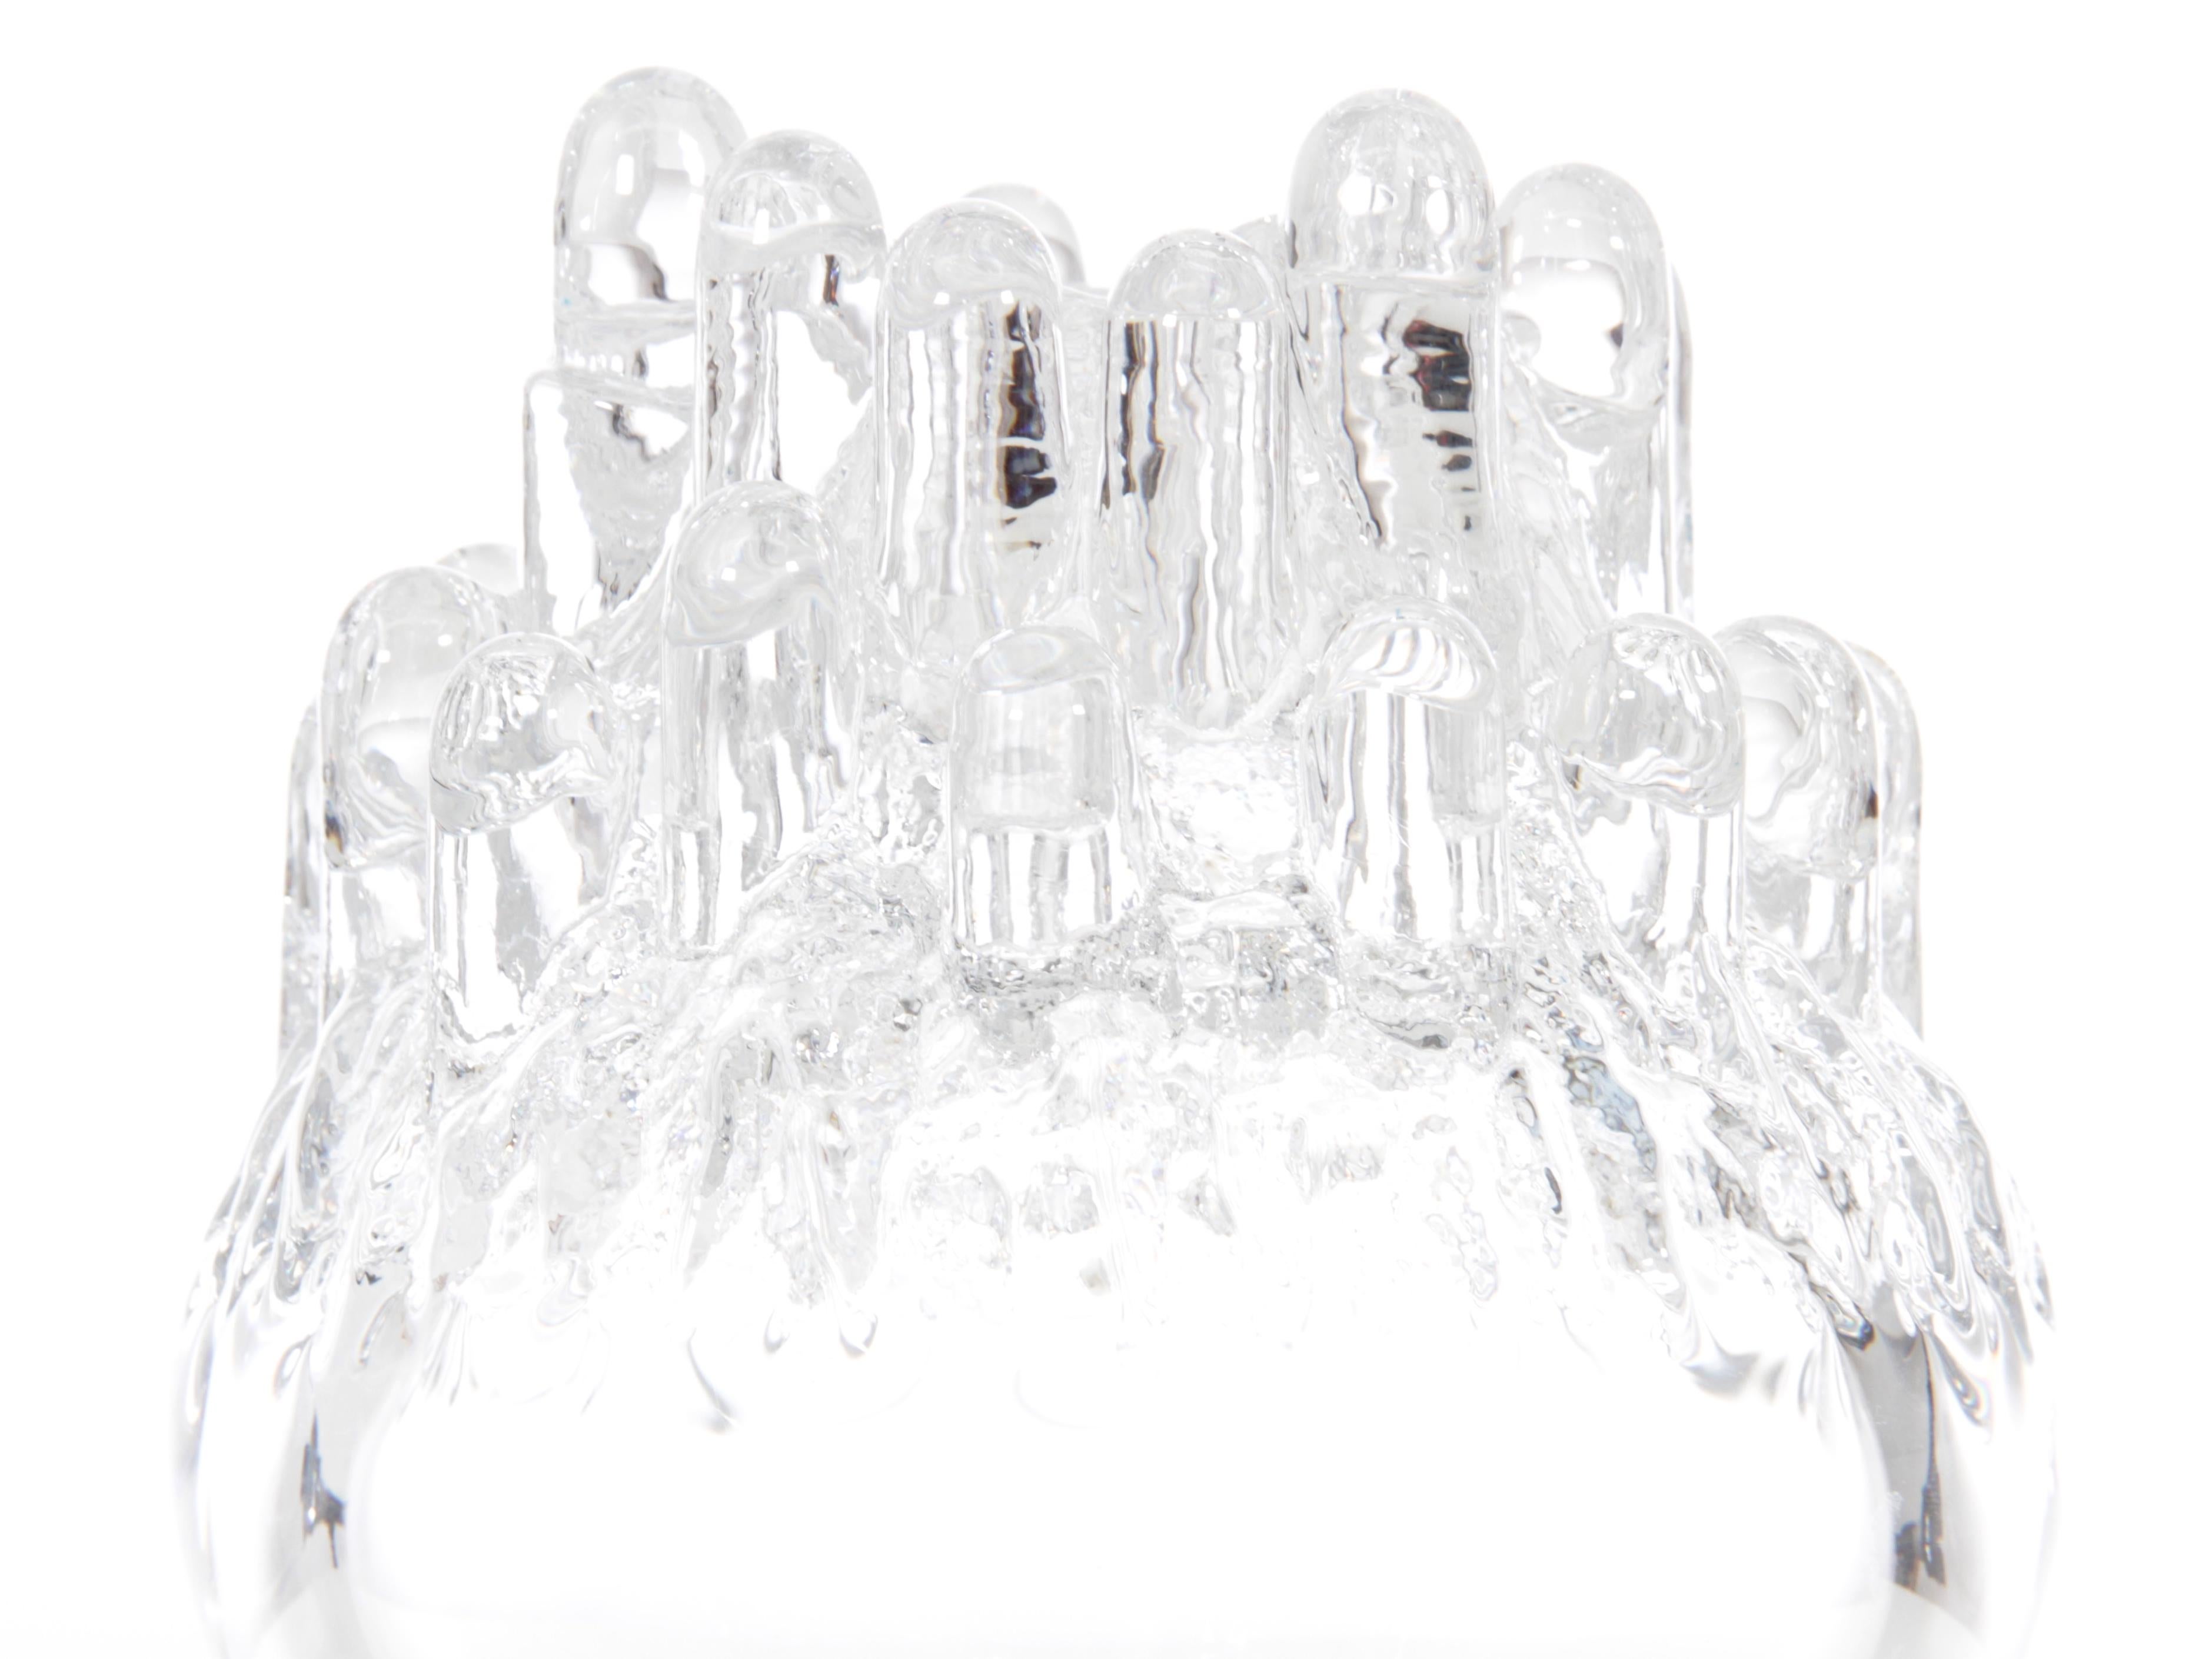 Polar candleholders are a Swedish classic.
When Goran Warff created the Polar collection in the late sixties at Kosta Boda, he gave his candlesticks a form of ice block playing on the contrast of ice and fire. The forms of stalactites allow the